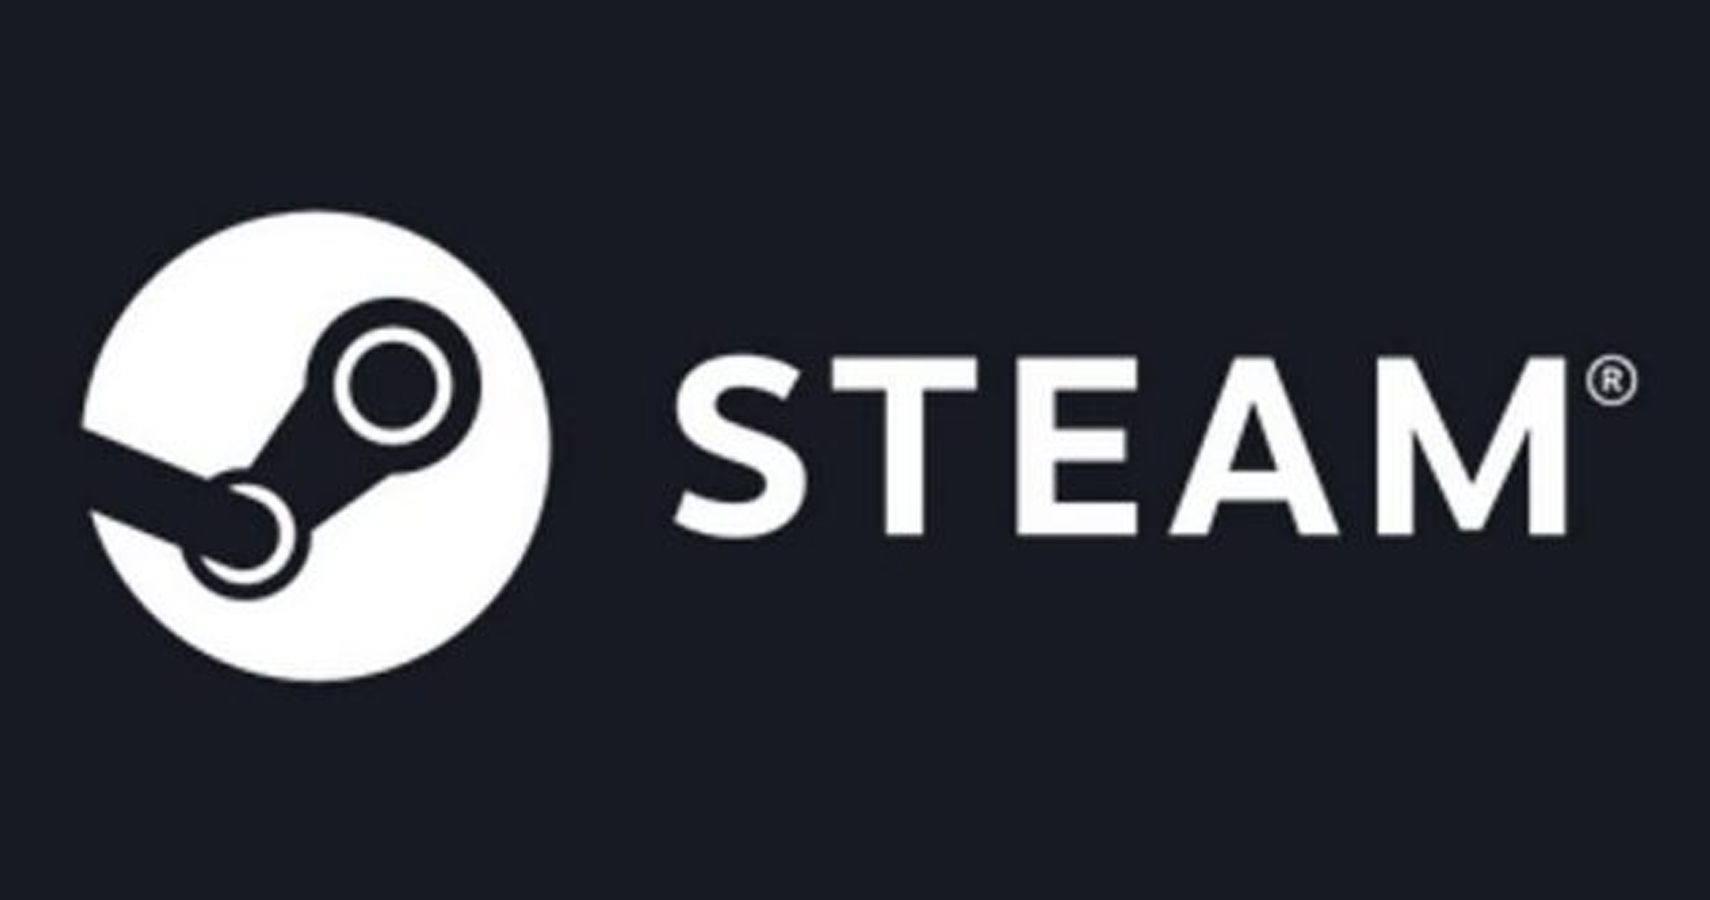 How much money have you (and I) spent on Steam?